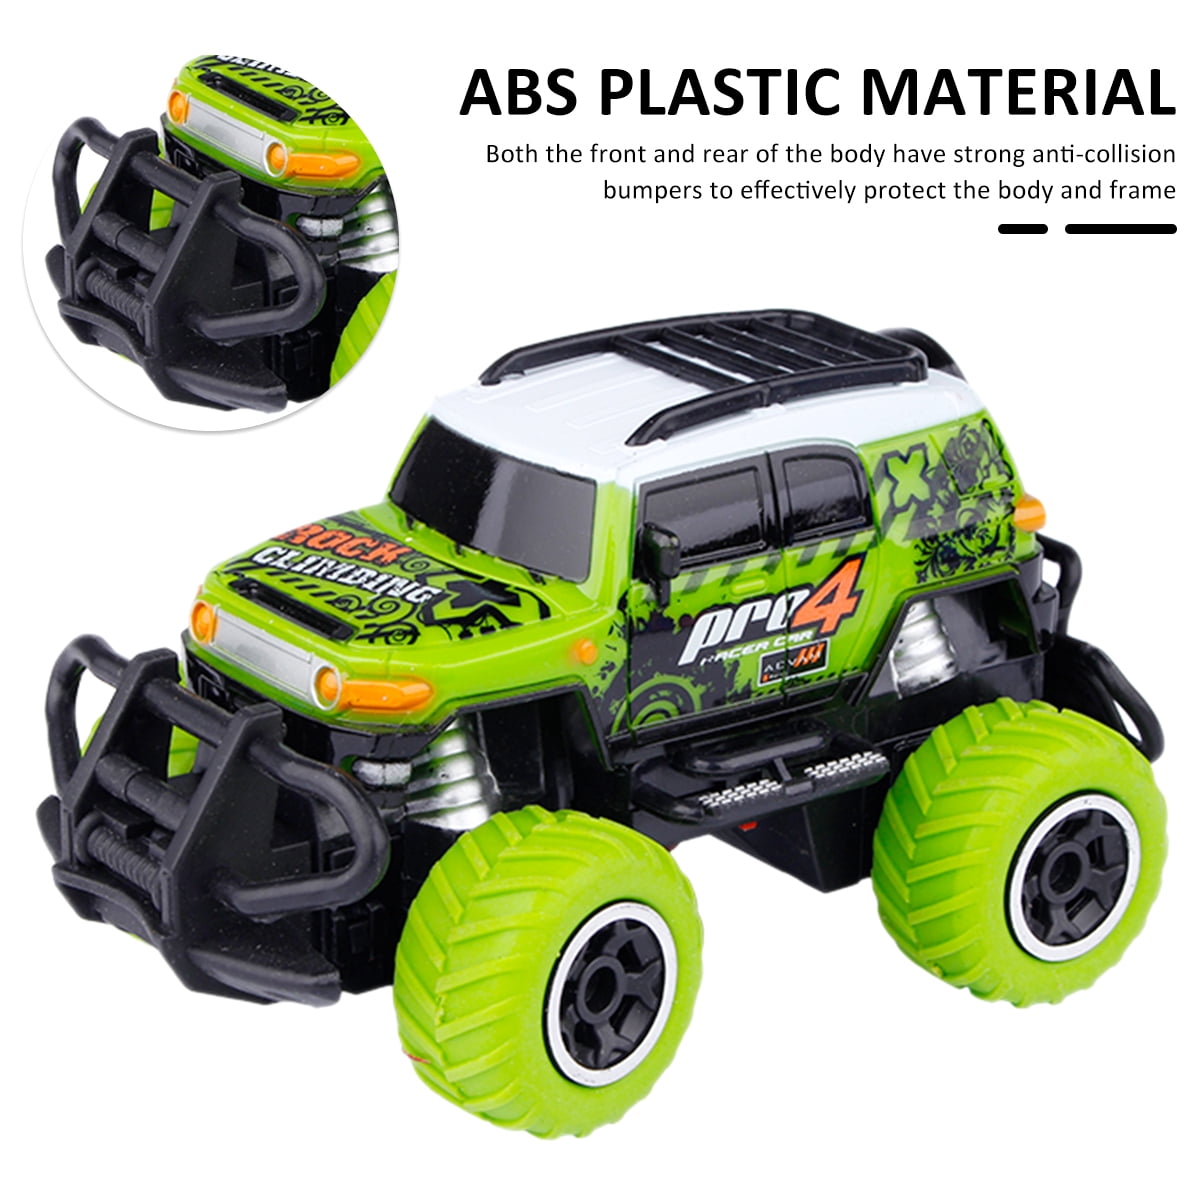 Fyrome Remote Control RC Car Toys Off Road Vehicle RC Truck, Christmas Birthday Party Cool Gadgets Car Toys Gift for Kids Boys Aged 3 4 6 7 8 Years Old - Walmart.com